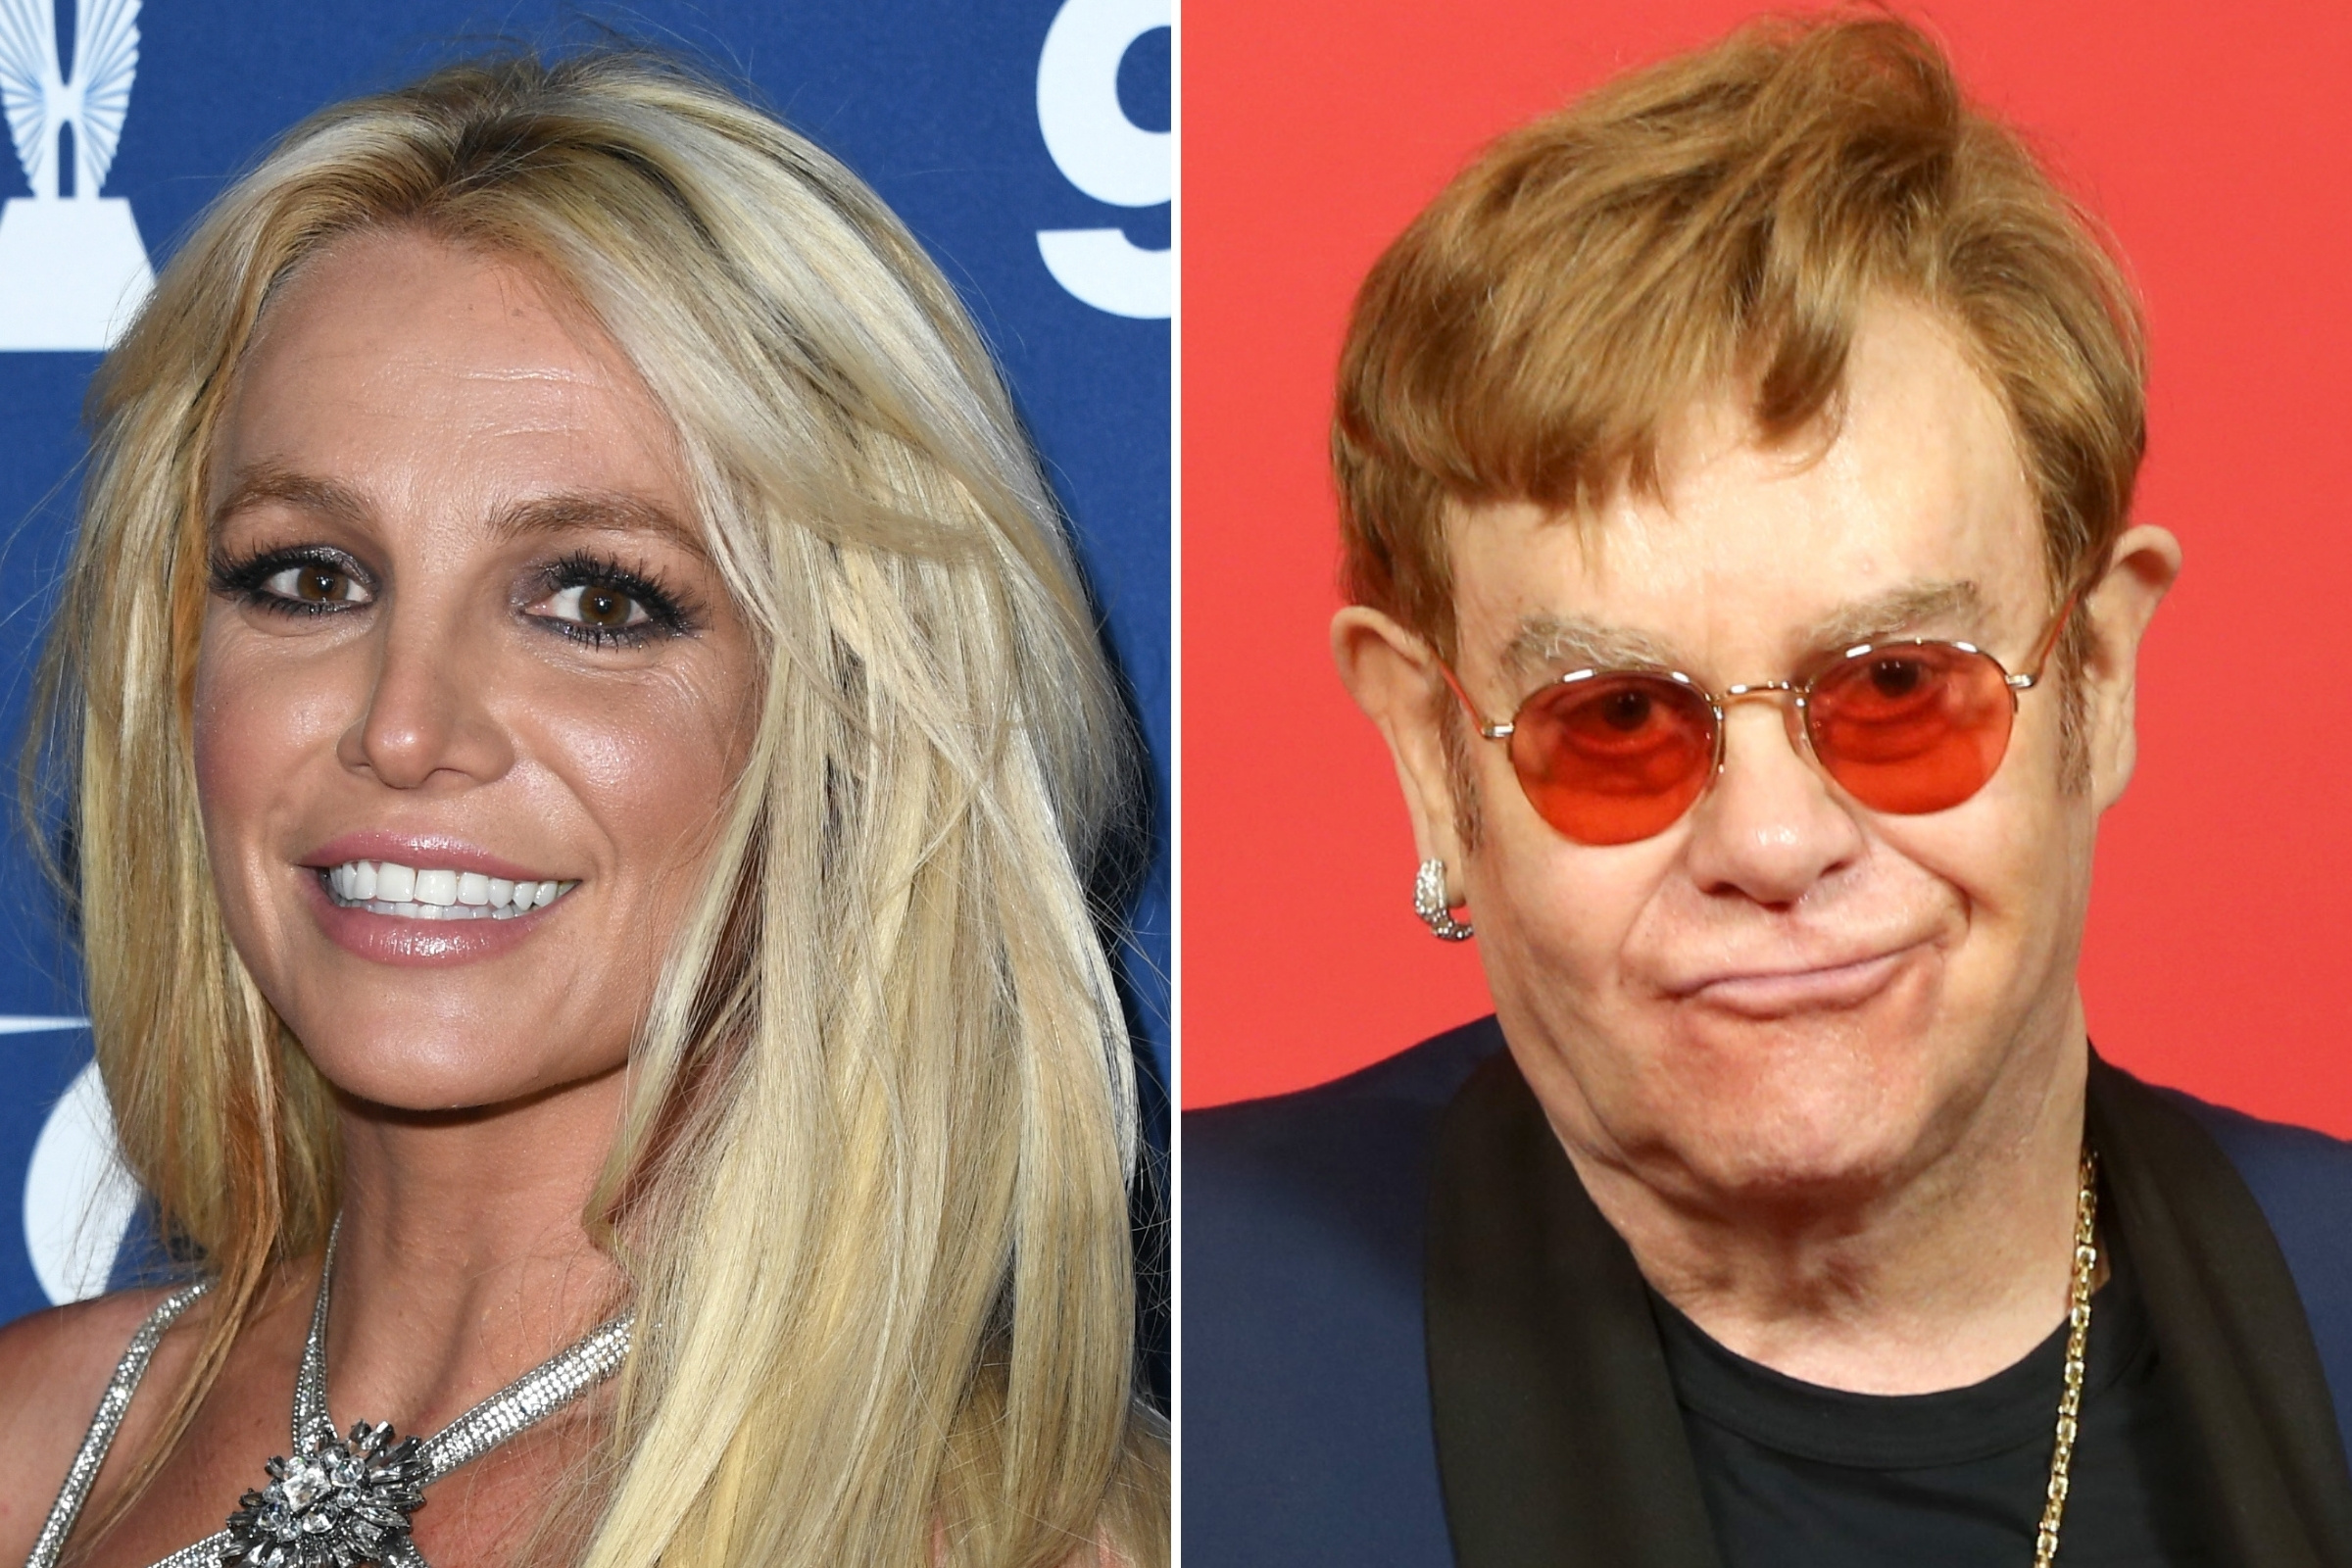 Elton John And Britney Spears: Who Is Richer? Net Worth Explored